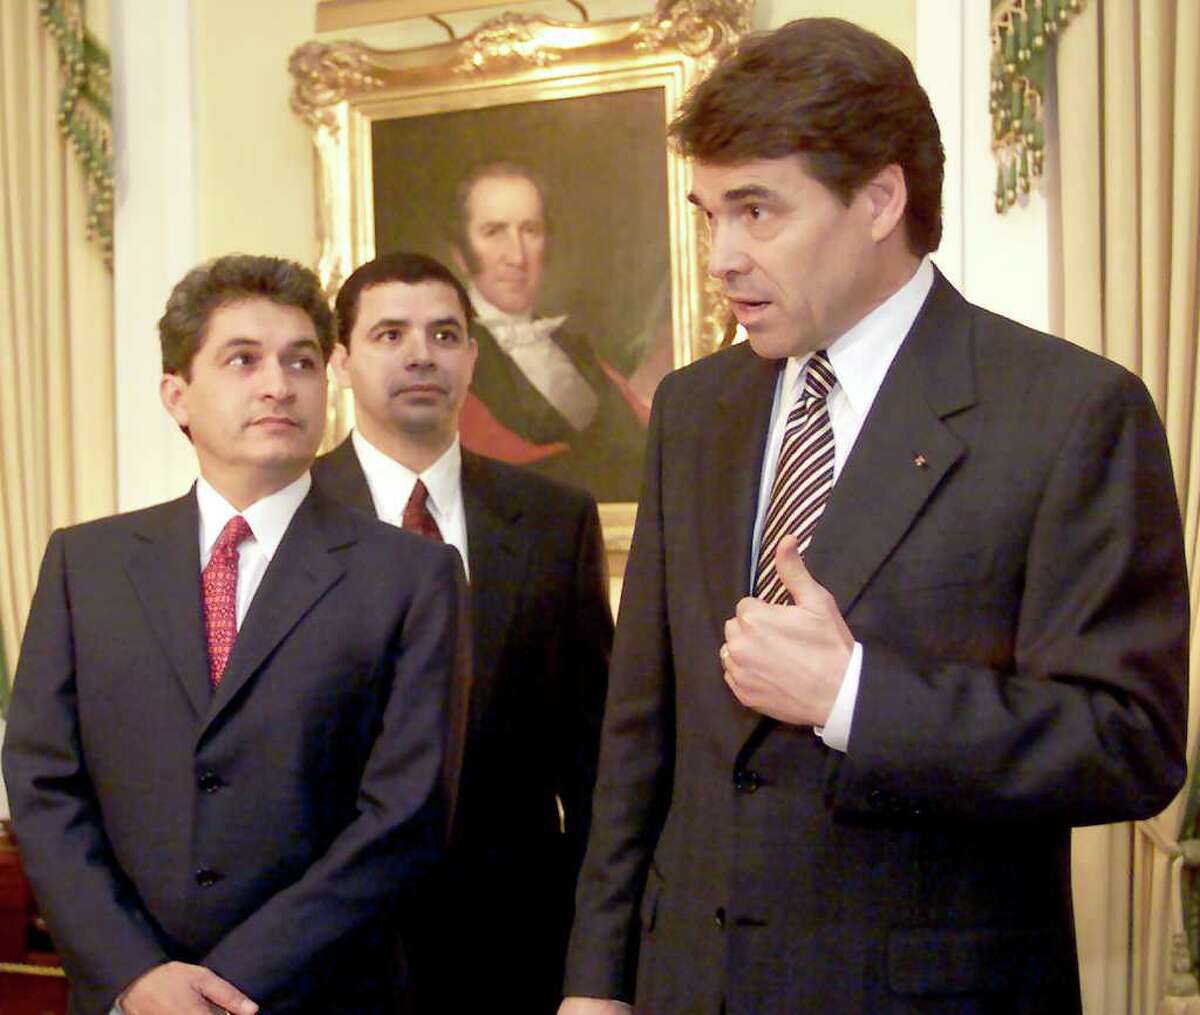 Texas Governor Rick Perry, right, answers questions following a news conference held with Tomas Yarrington, governor of the Mexican state of Tamaulipas, left, and Texas Secretary of State Henry Cuellar, center, at the Governor's Mansion in Austin, Texas, Thursday, Feb. 22, 2001, where the governors discussed boosting cross-border trade.